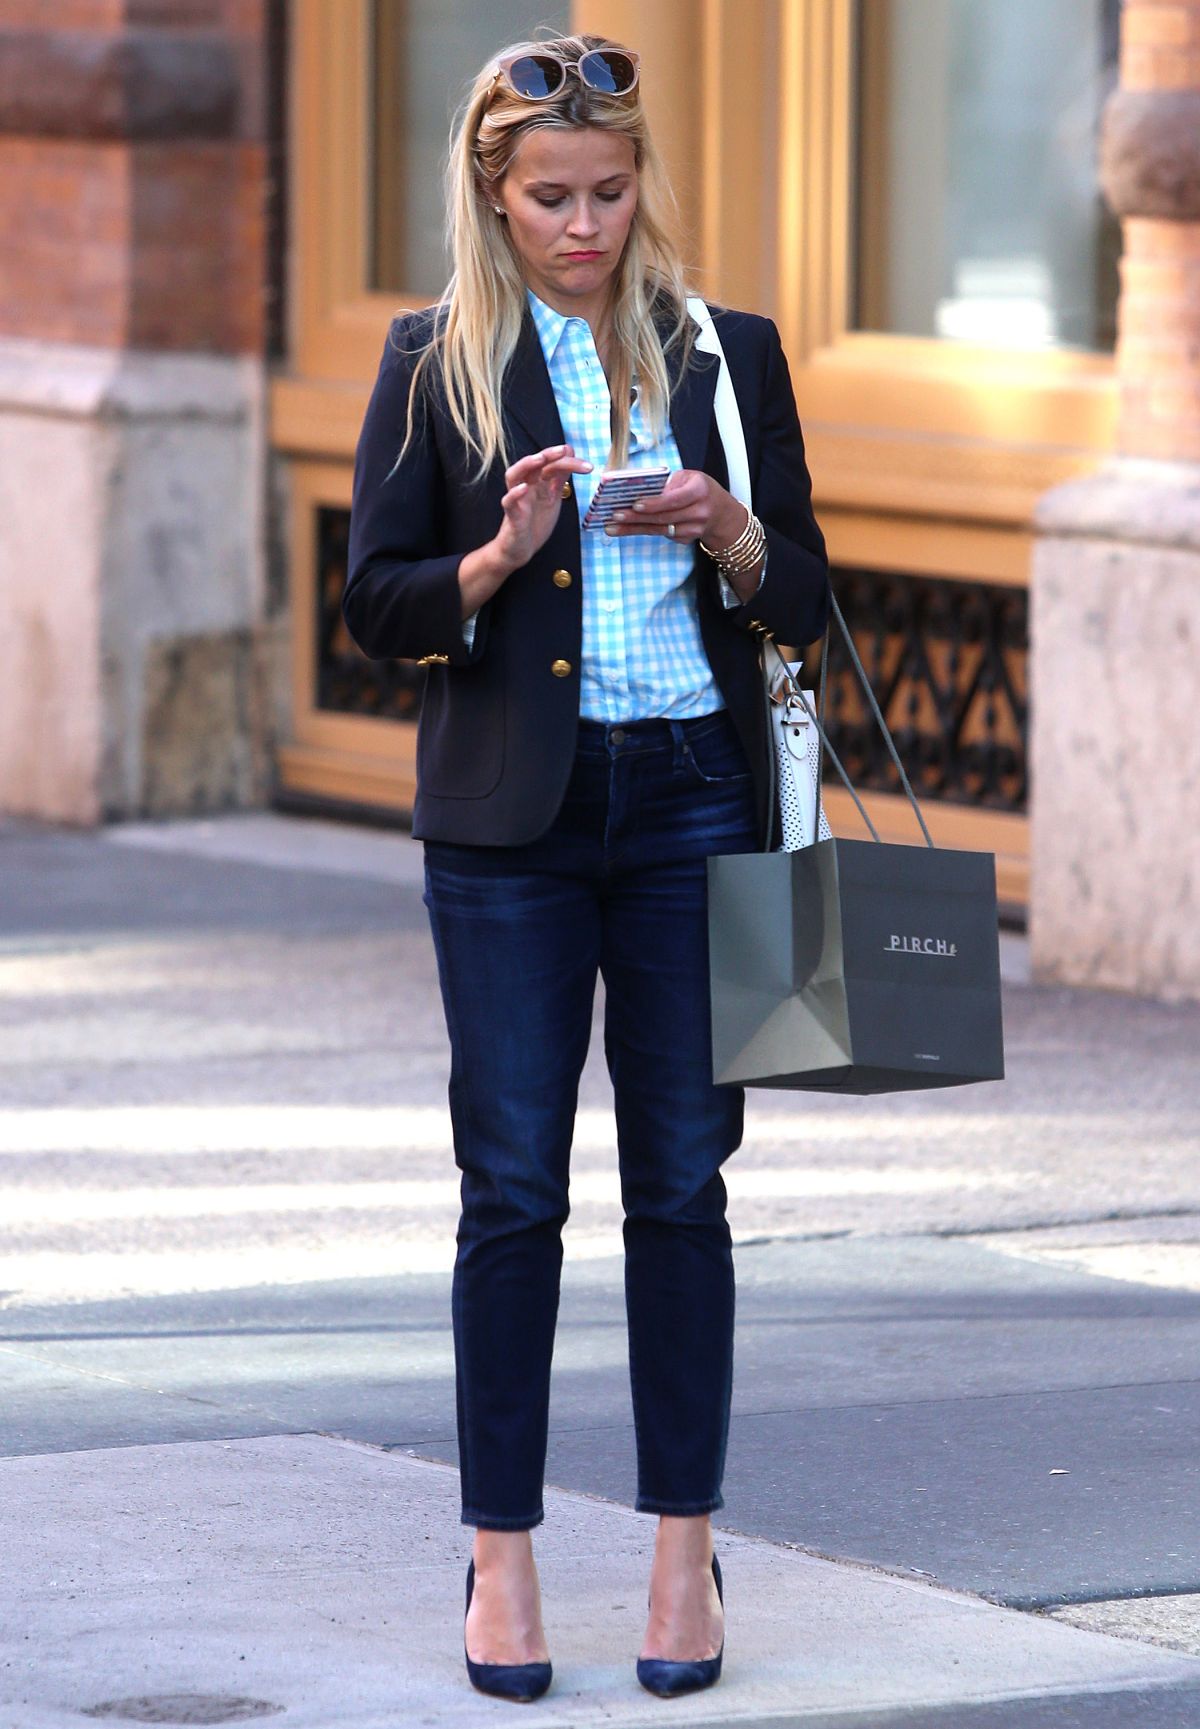 reese-witherspoon-shopping-in-new-york-city-61416-13.jpg